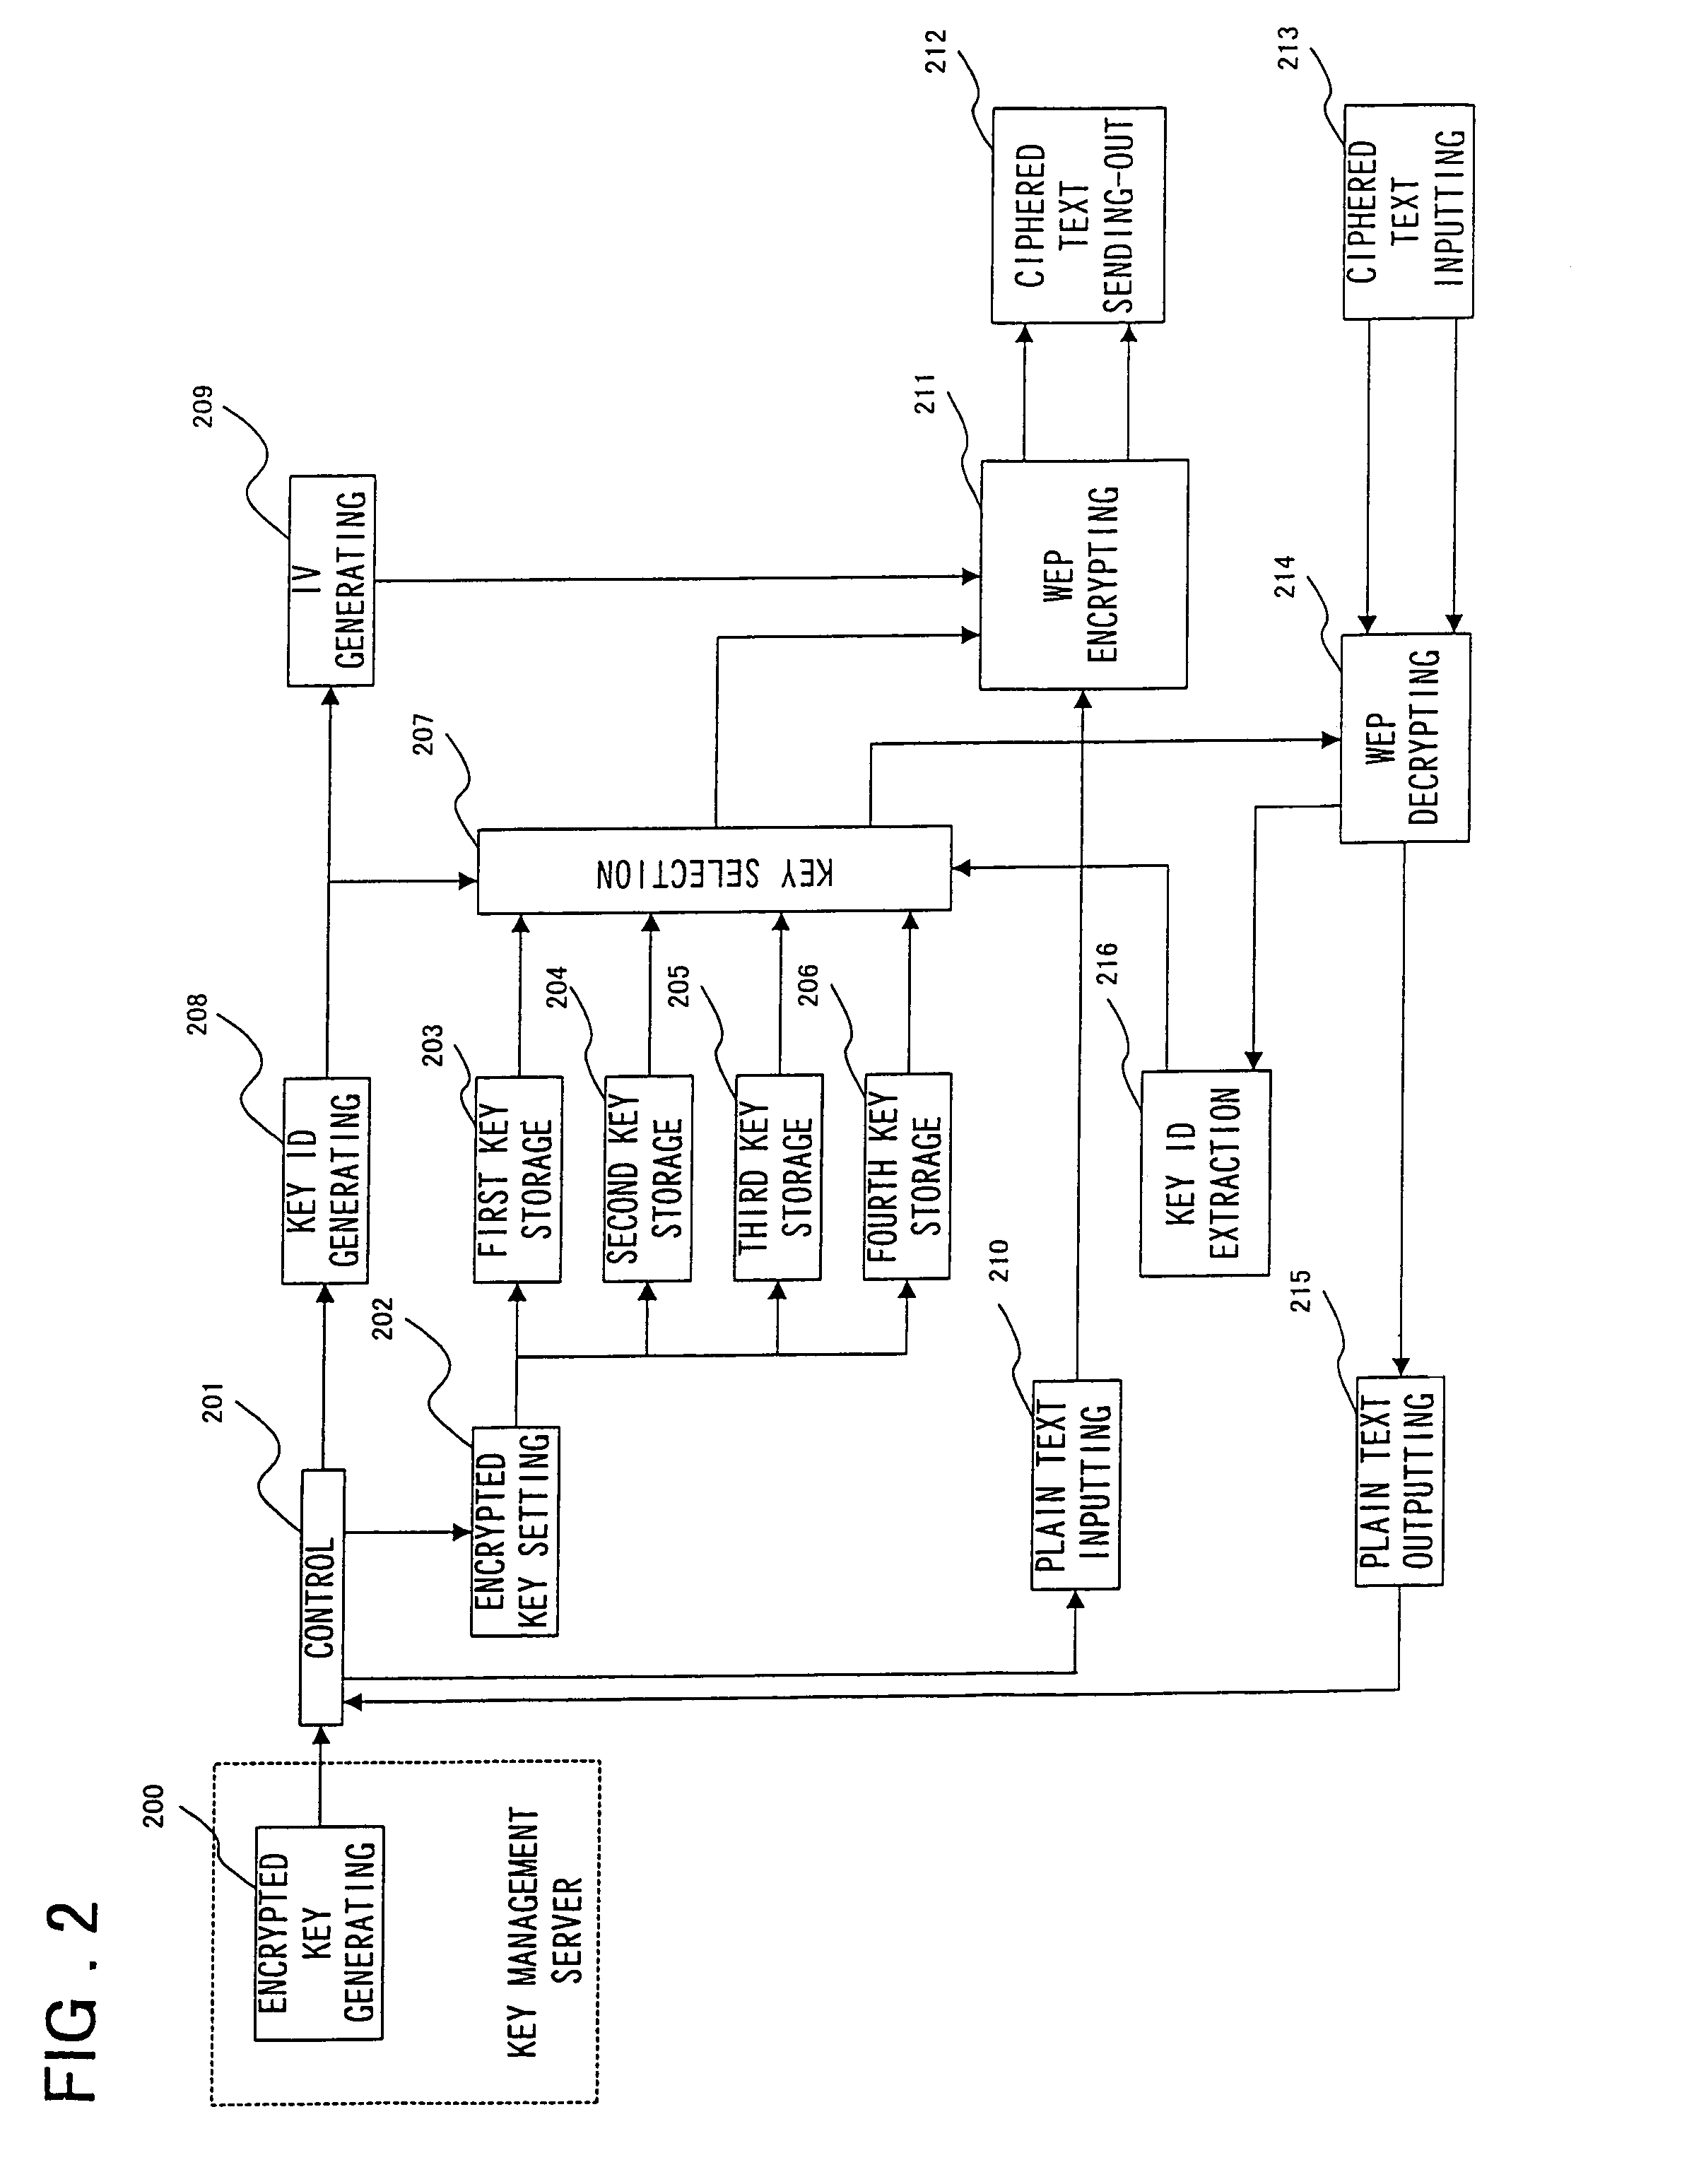 System and method for updating encryption key for wireless LAN